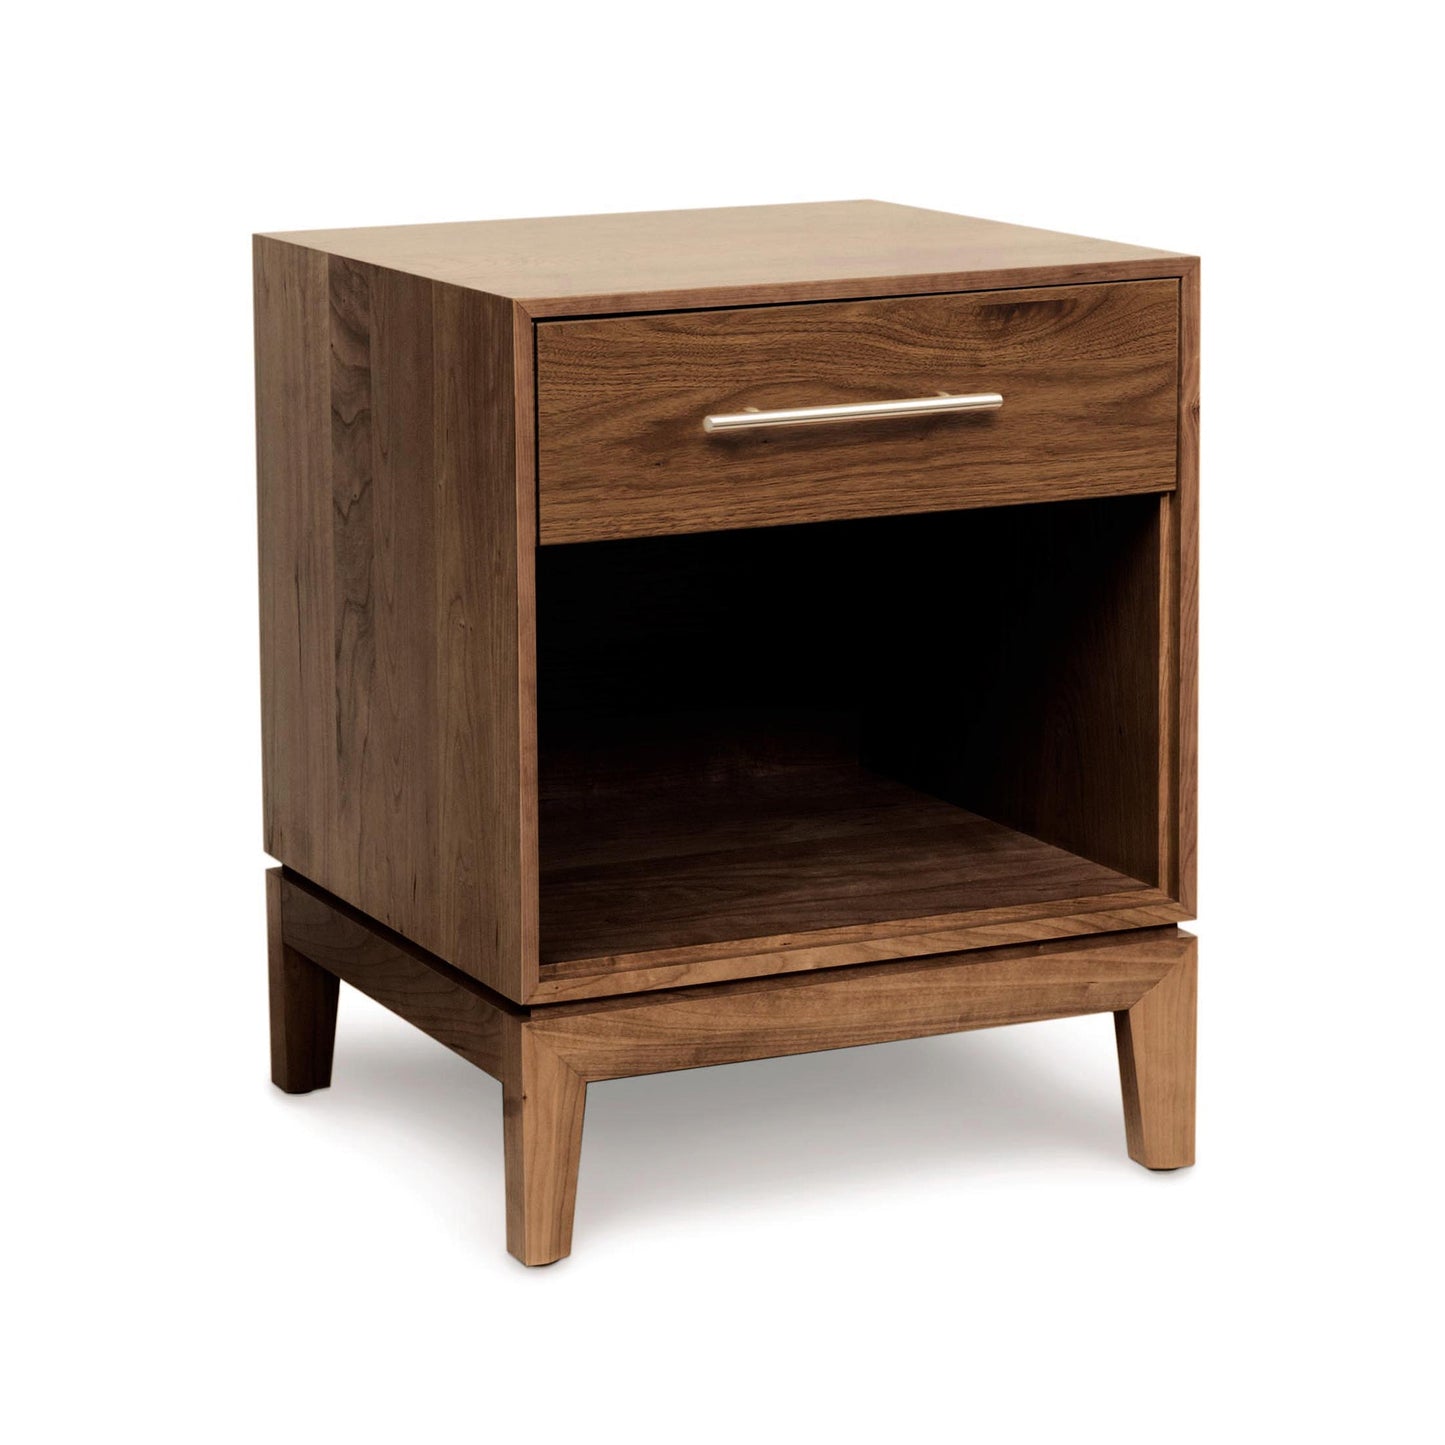 A wooden nightstand with a drawer on top.